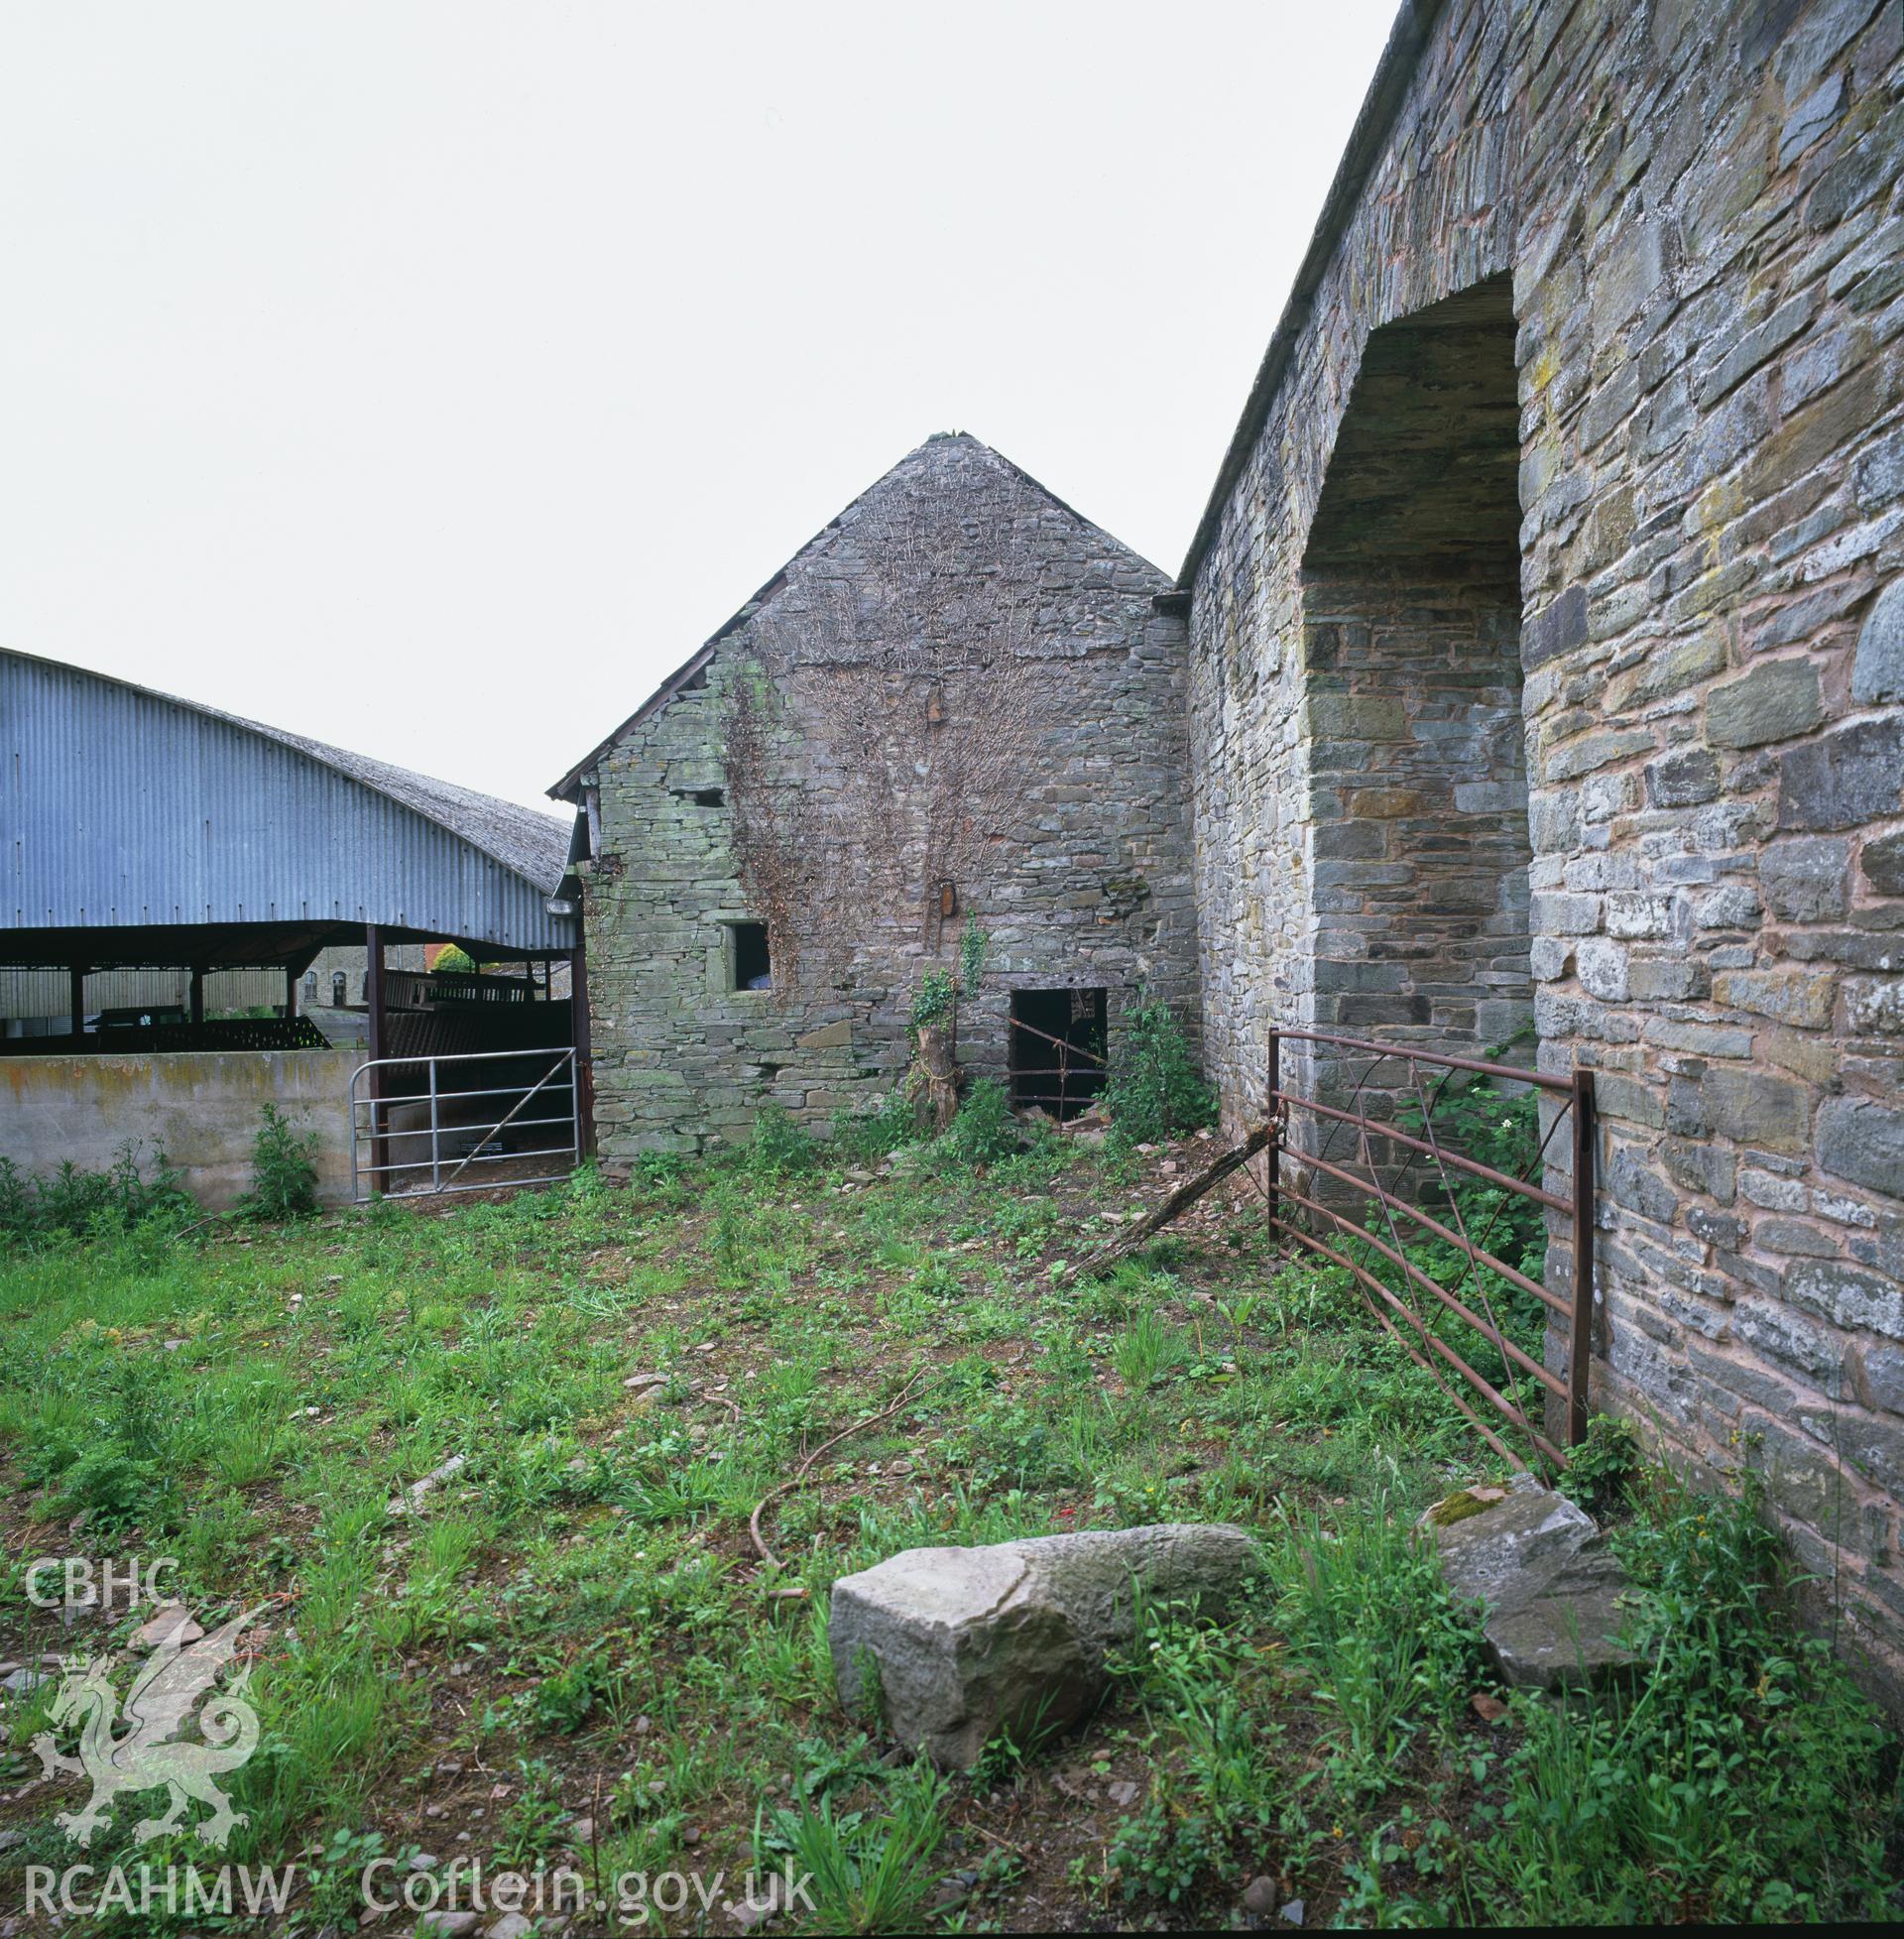 RCAHMW colour transparency showing an exterior view of the gable end of the cowhouse at Clyro Court Farm, taken by Fleur James, August 2003